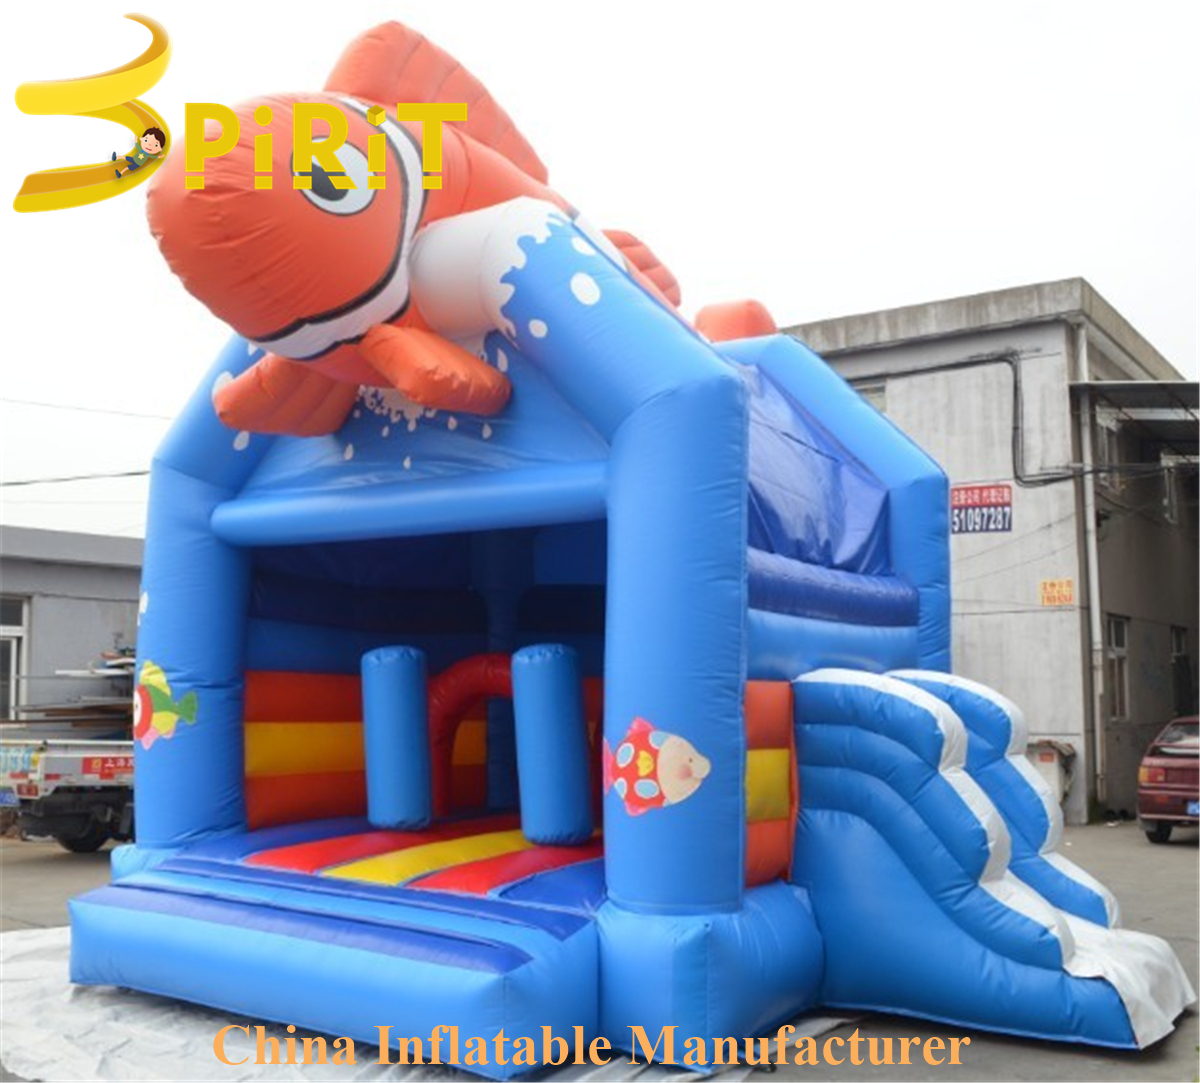 How to buy bounce house playground for kids ages 3-5 years?-SPIRIT PLAY,Outdoor Playground, Indoor Playground,Trampoline Park,Outdoor Fitness,Inflatable,Soft Playground,Ninja Warrior,Trampoline Park,Playground Structure,Play Structure,Outdoor Fitness,Water Park,Play System,Freestanding,Interactive,independente ,Inklusibo, Park, Pagsaka sa Bungbong, Dula sa Bata